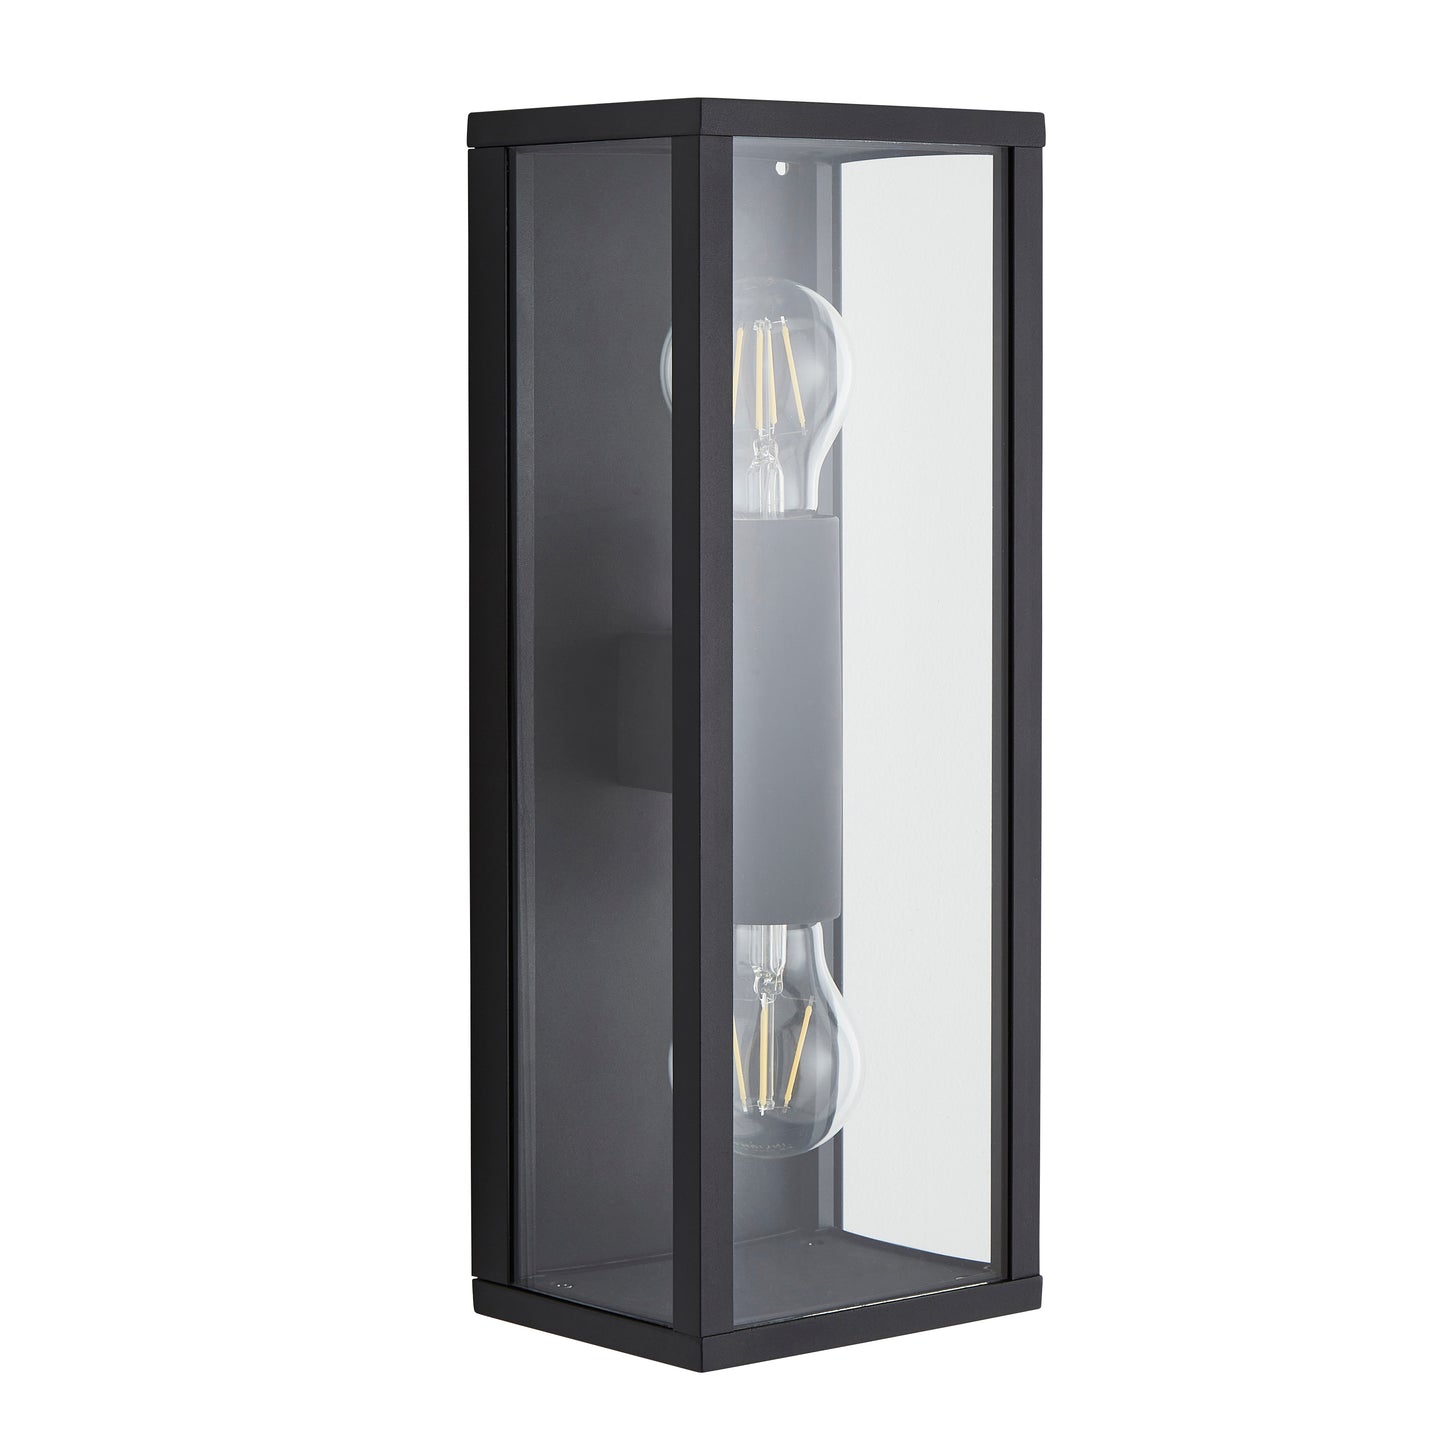 A modern take on a traditional design outdoor wall light perfect for adding style and security The traditional front-door lantern has had a modern make over in the form of our Seb double up and down wall light with its square glass windows a striking die cast matt black finish this is sure to add an statement to any wall. 